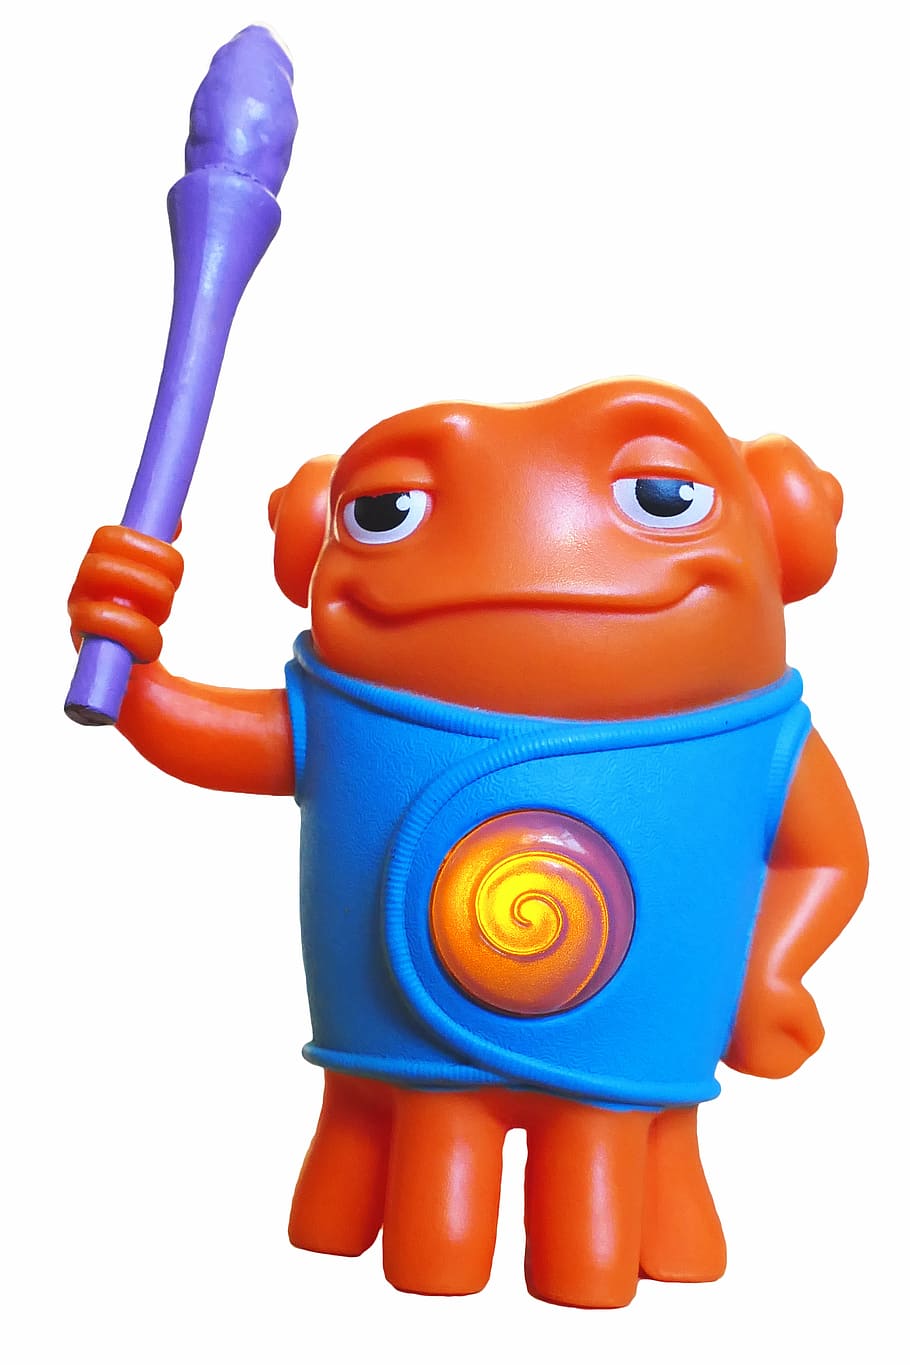 orange frog character toy, home, alien, space, science, fiction, HD wallpaper